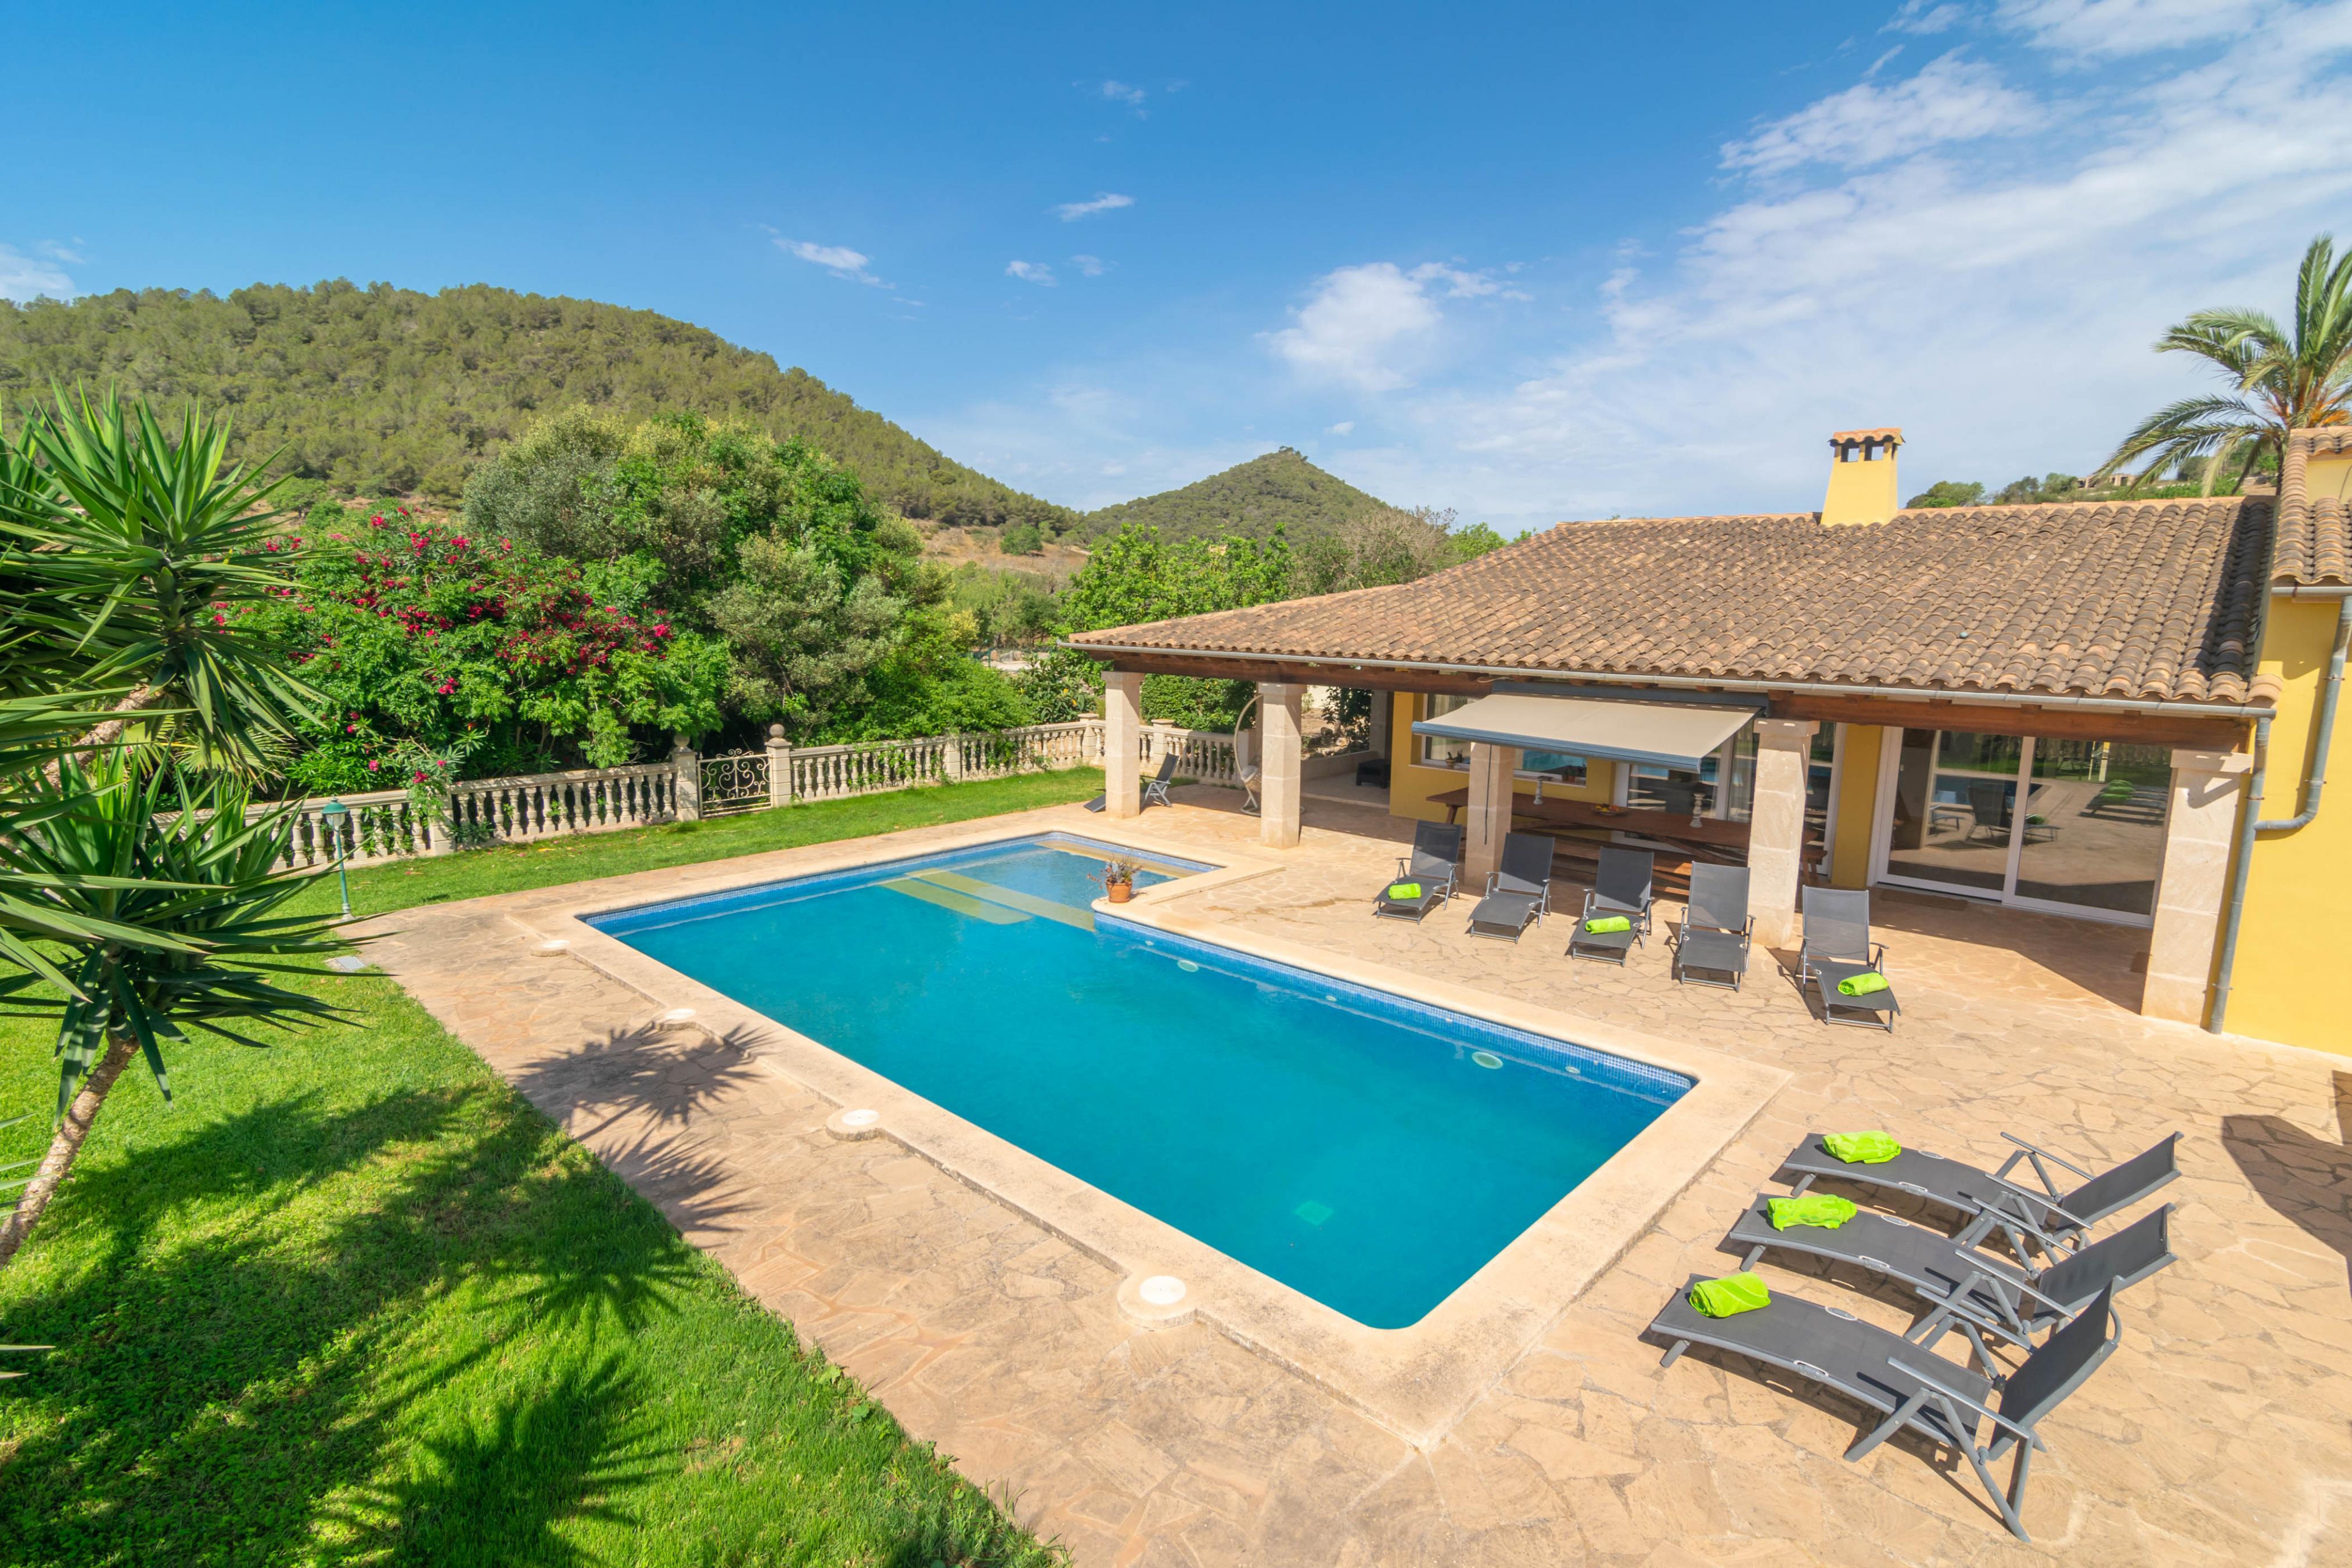 Property Image 1 - CA NA MARGALIDA - Fantastic country house with private pool and a few km from the beach. Free WIFI.